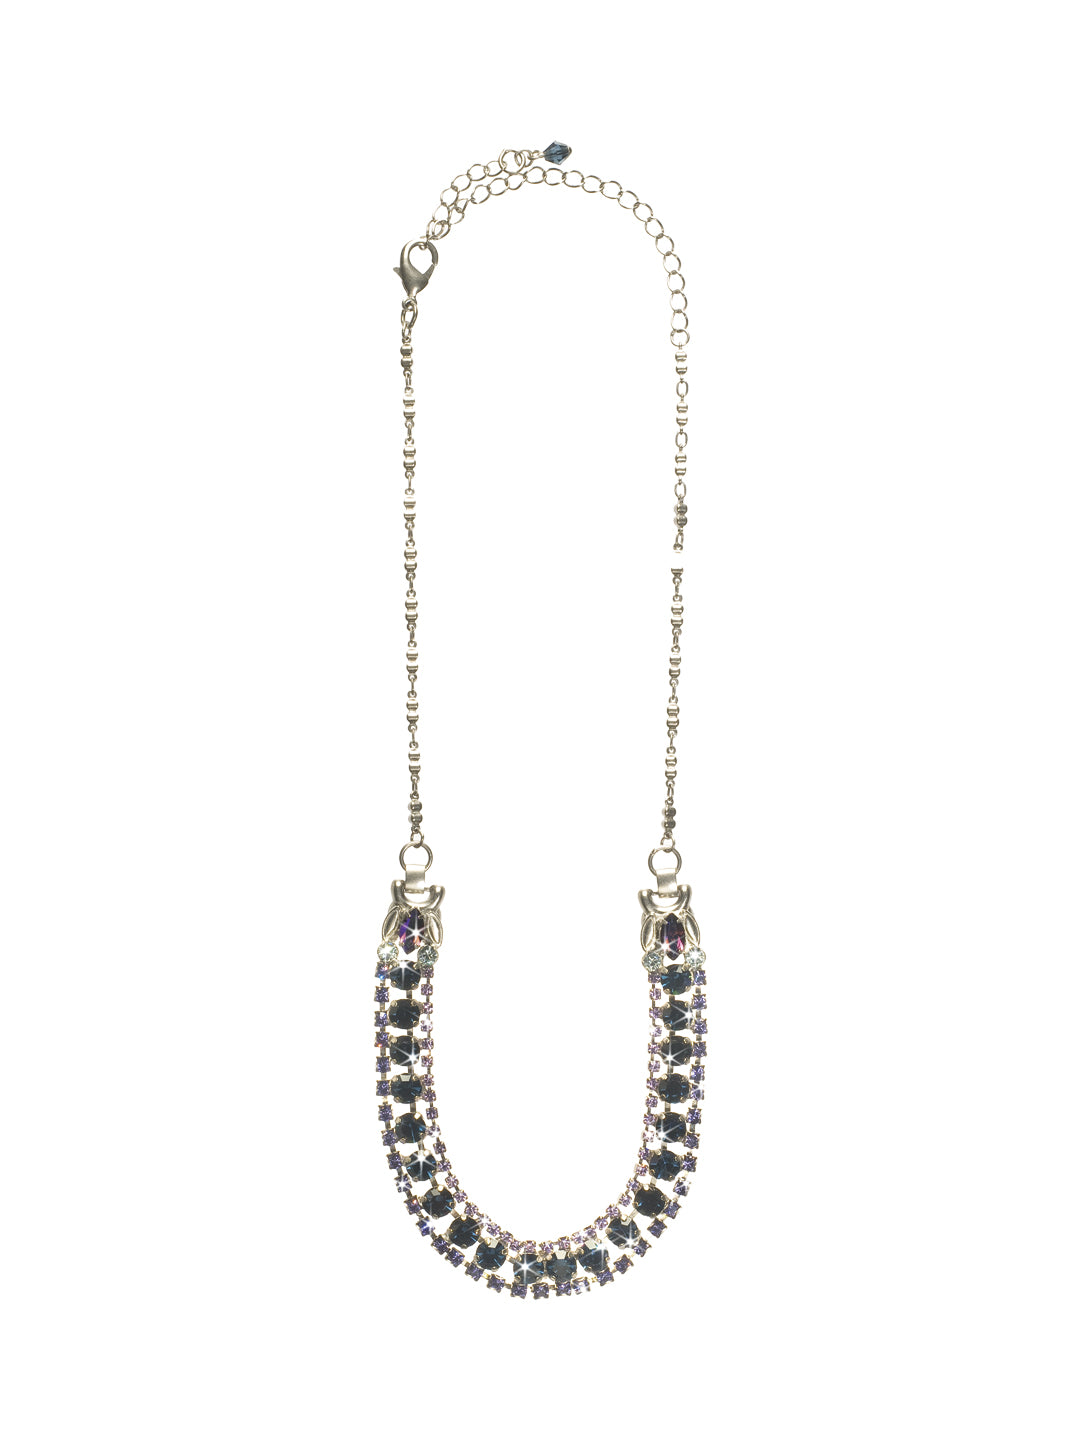 Right on Track Necklace - NCN5ASHY - Pile on the shine with this necklace. A single strand of crystals set between two rows of contrasting rhinestones will add glamour to any look. From Sorrelli's Hydrangea collection in our Antique Silver-tone finish.